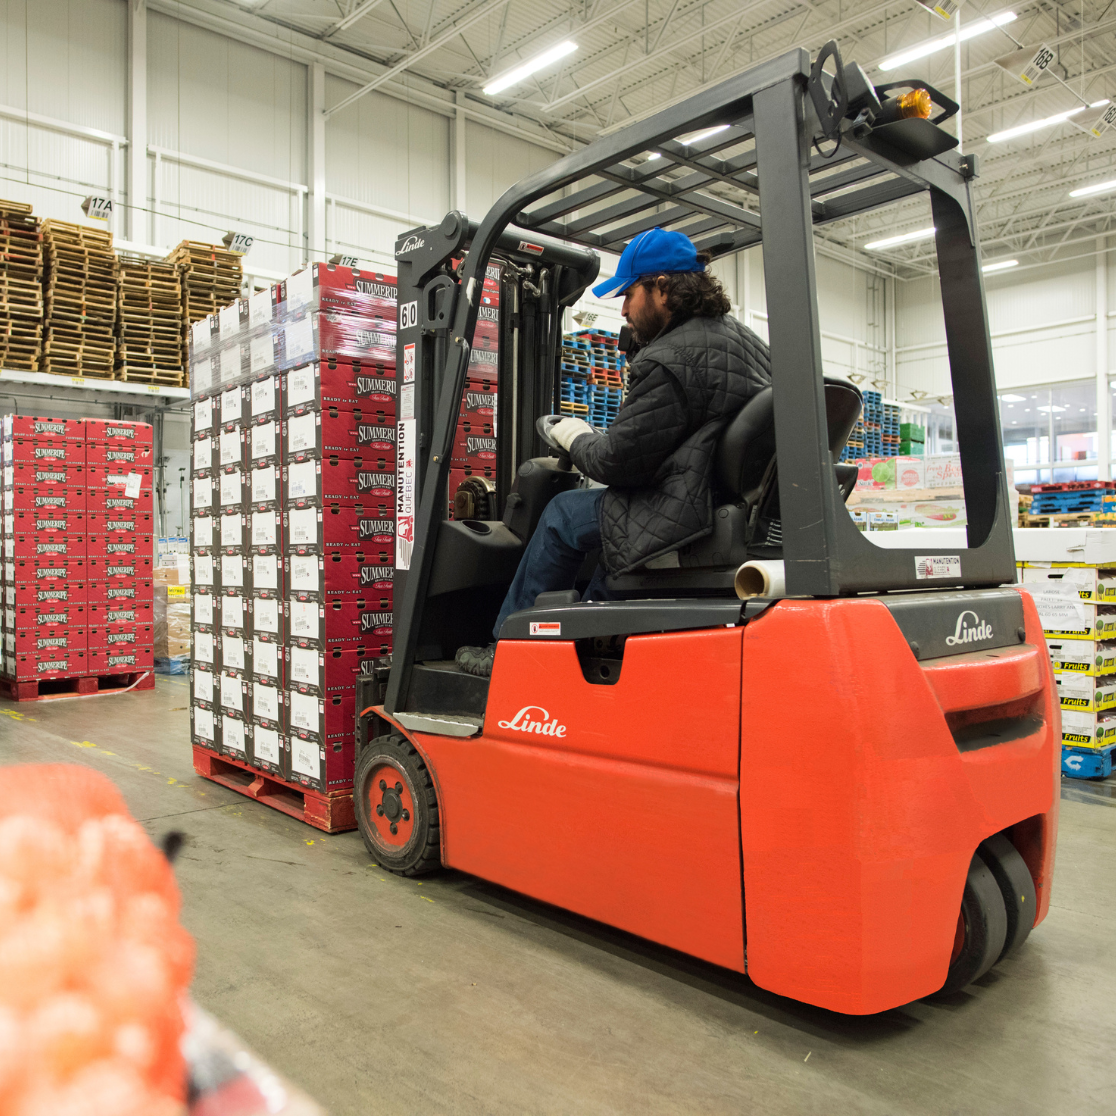 Linde electric lift truck